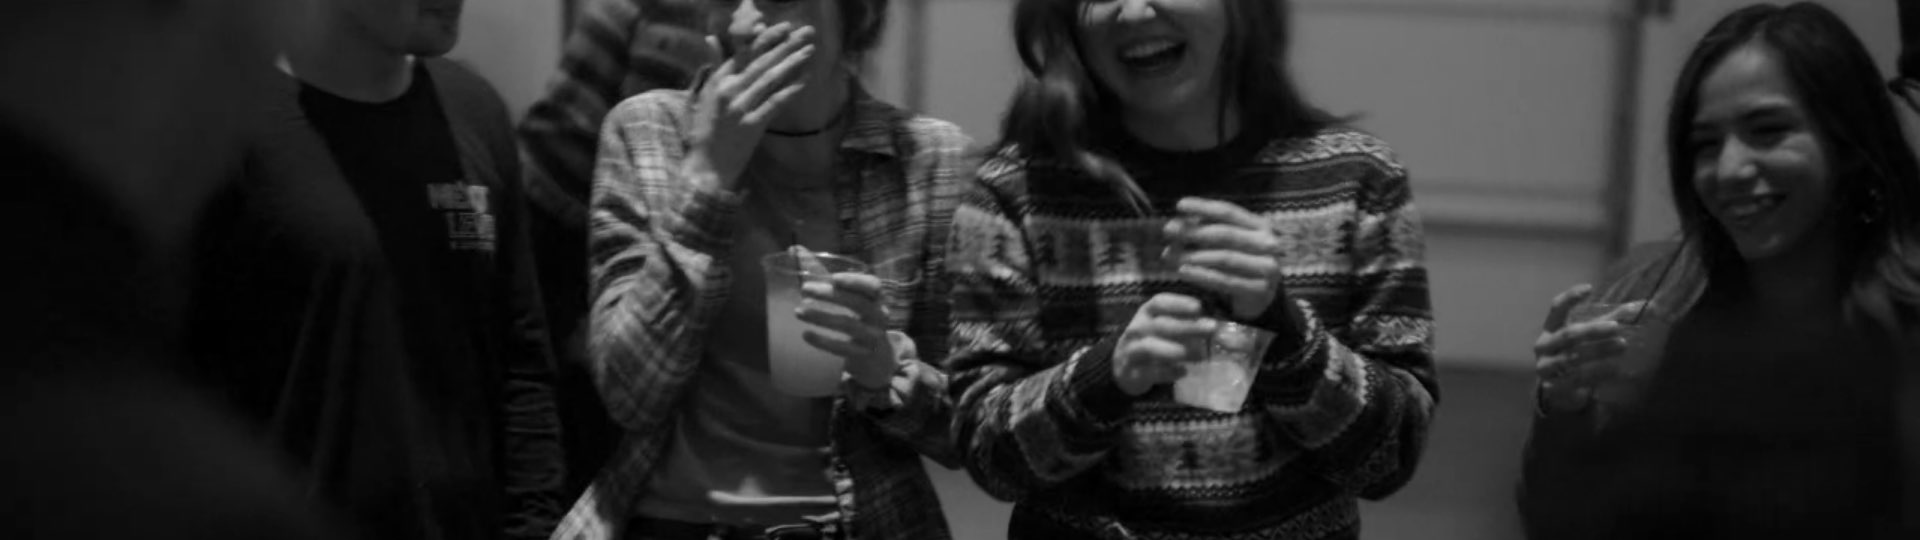 Girls holding drinks are laughing.